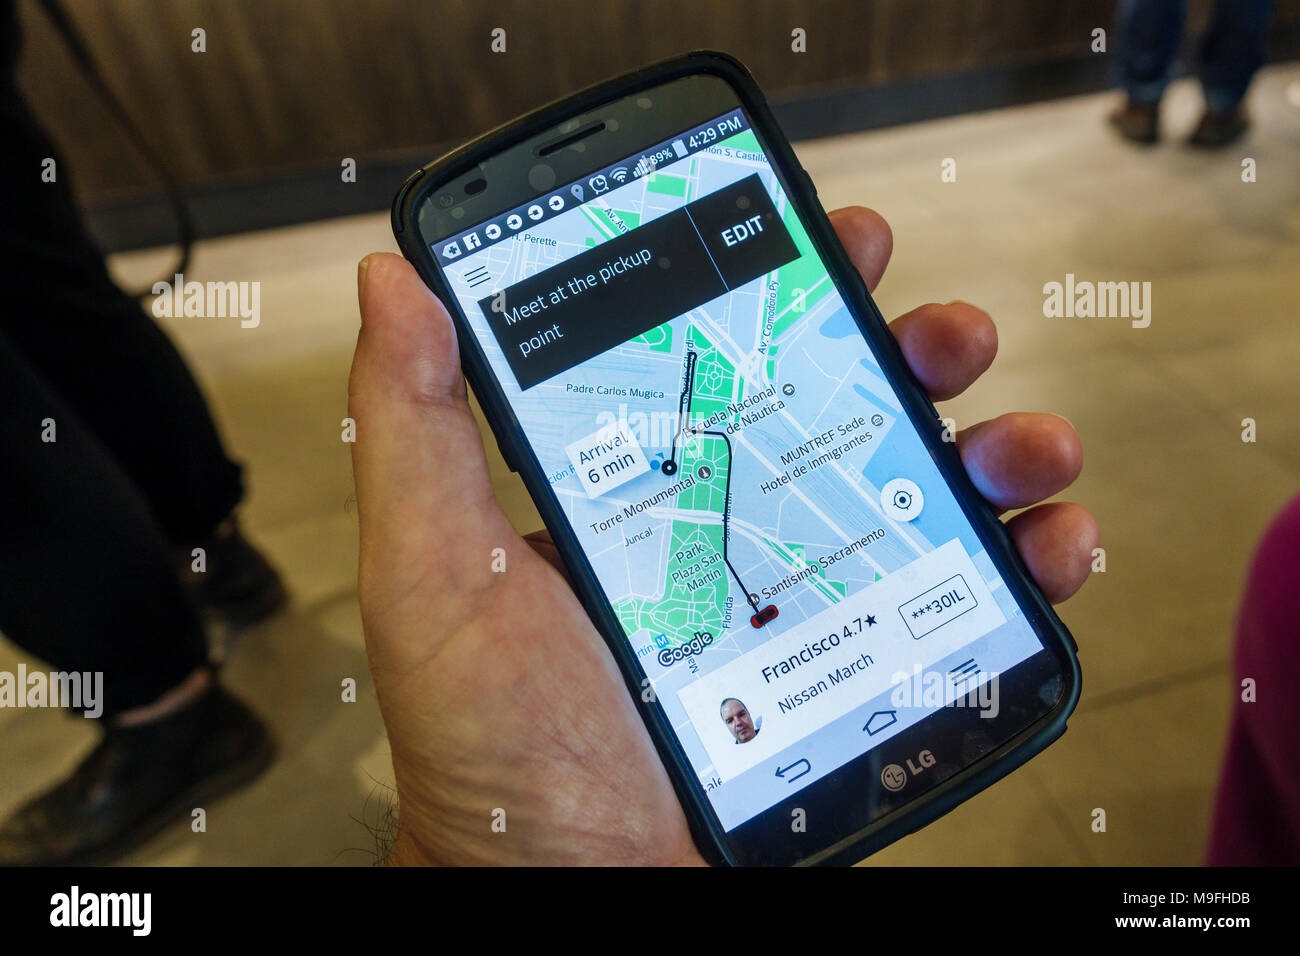 Buenos Aires Argentina,smartphone cell phone phones  texting,Uber,peer-to-peer ridesharing,GPS map,Highway Route,pickup  point,ride,driver,app,Hispanic Stock Photo - Alamy